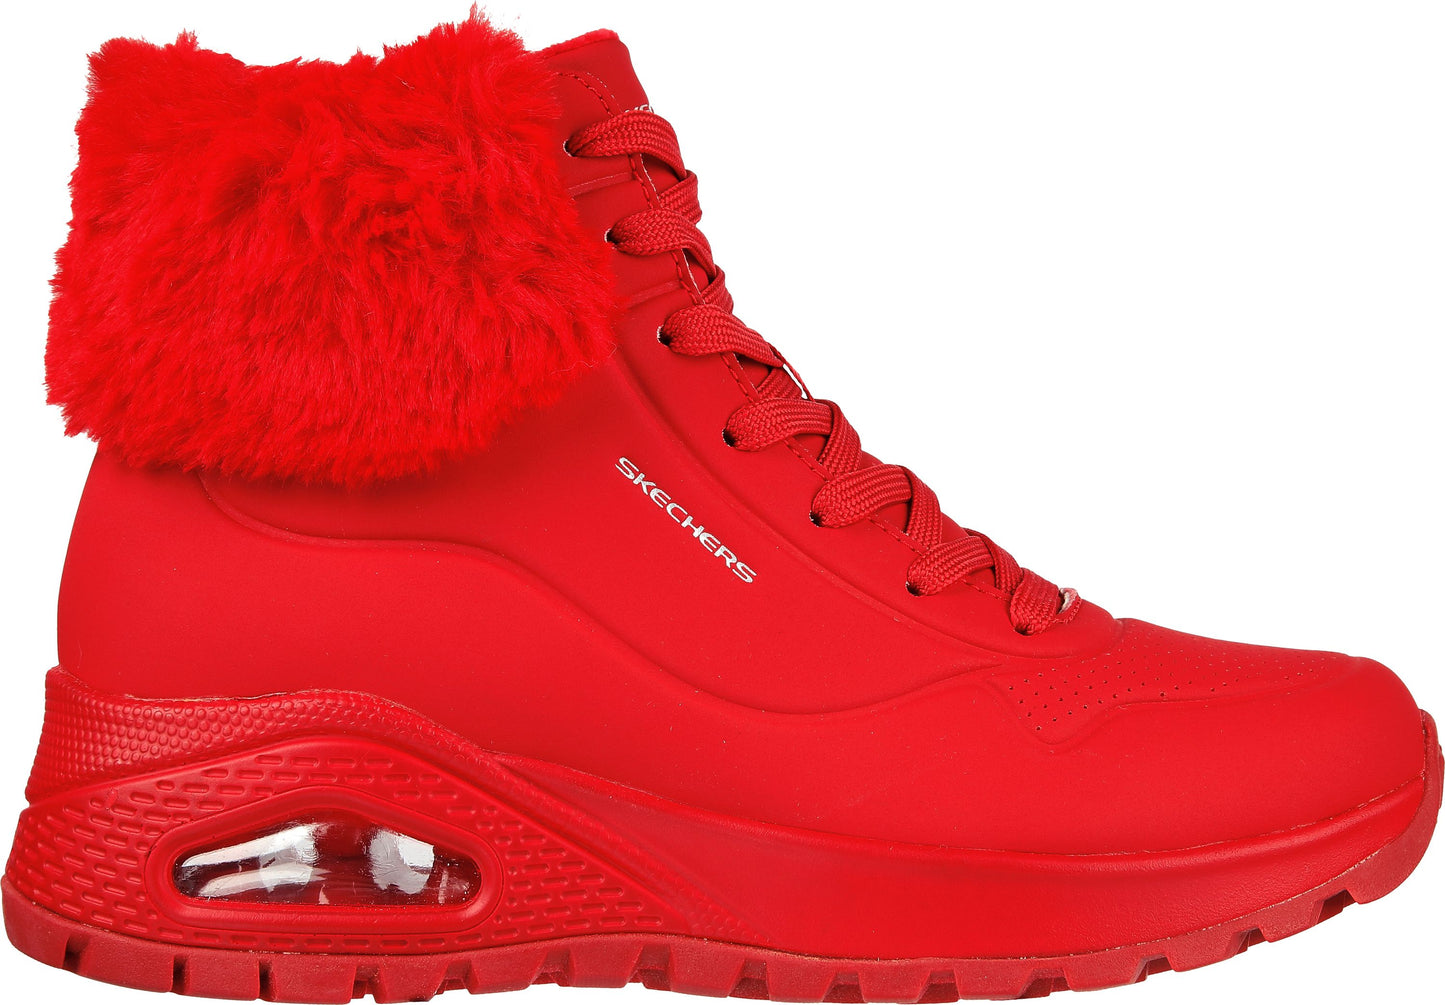 Skechers Boots Uno Rugged Fall Air Red